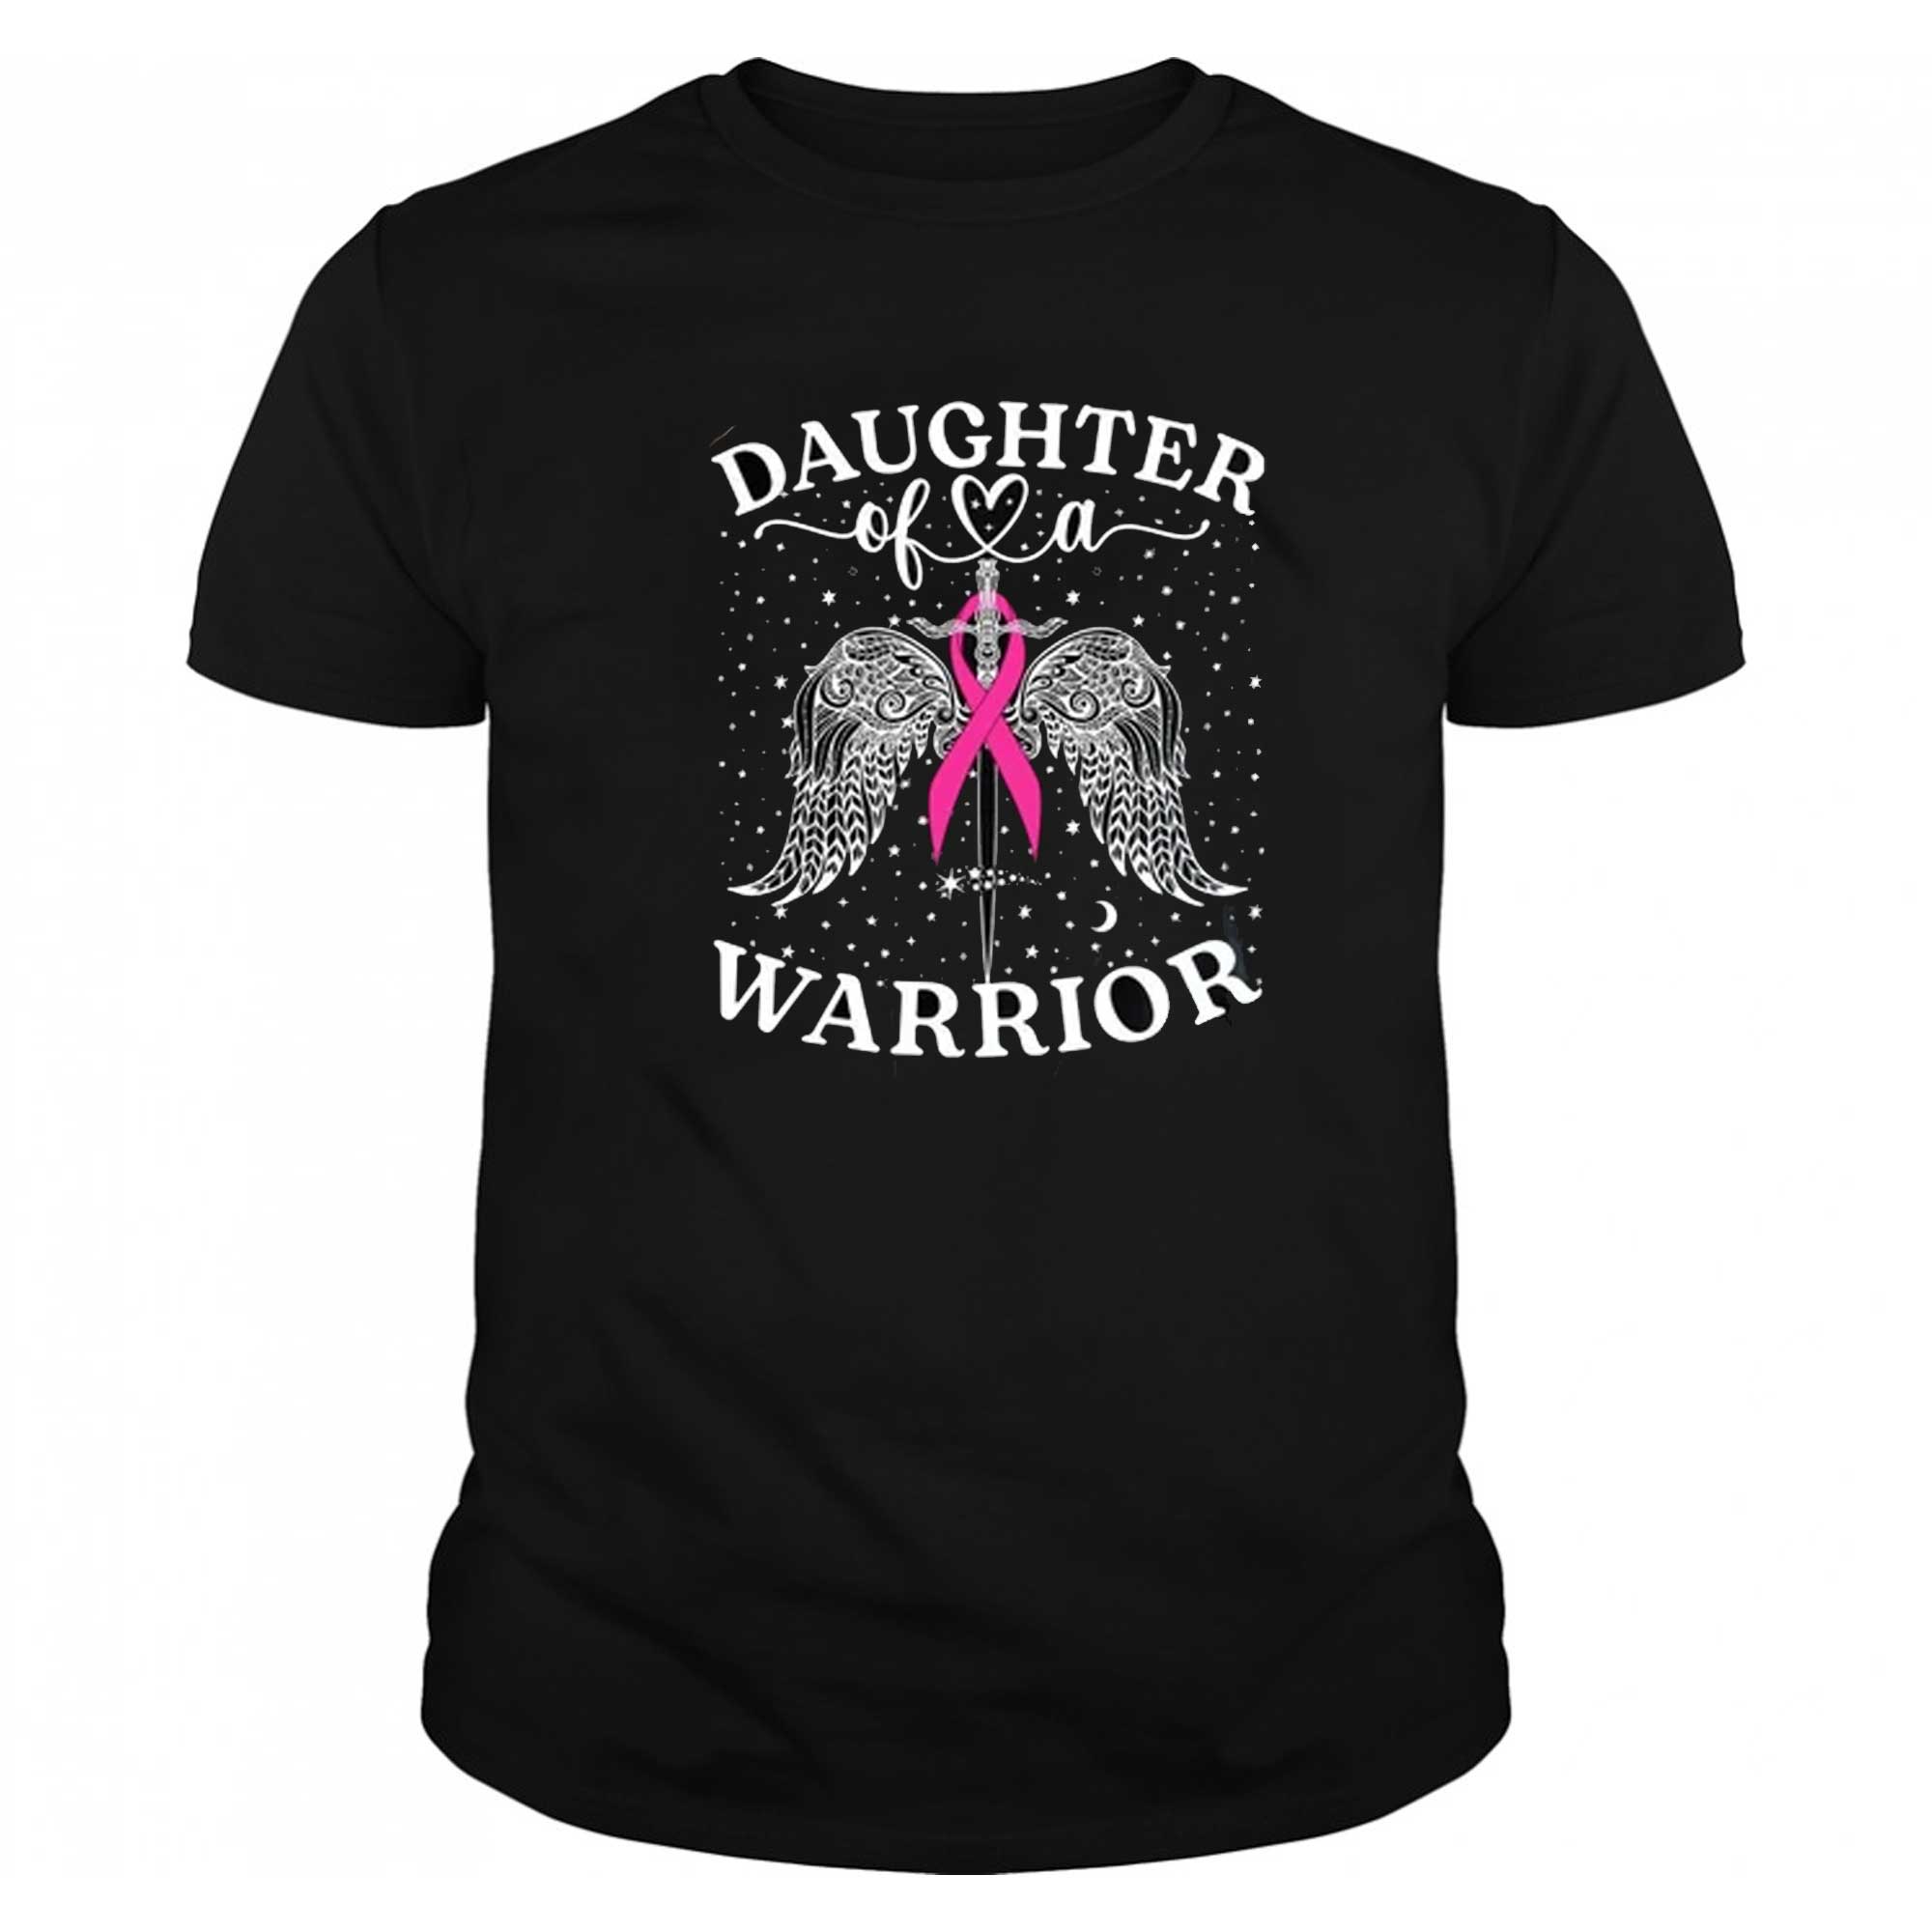 Skitongift-Breast-Cancer-Shirts-For-Daughter-Of-A-Warrior-Mom-Family-Breast-Cancer-Ribbon-Awareness-Funny-Shirts-Long-Sleeve-Tee